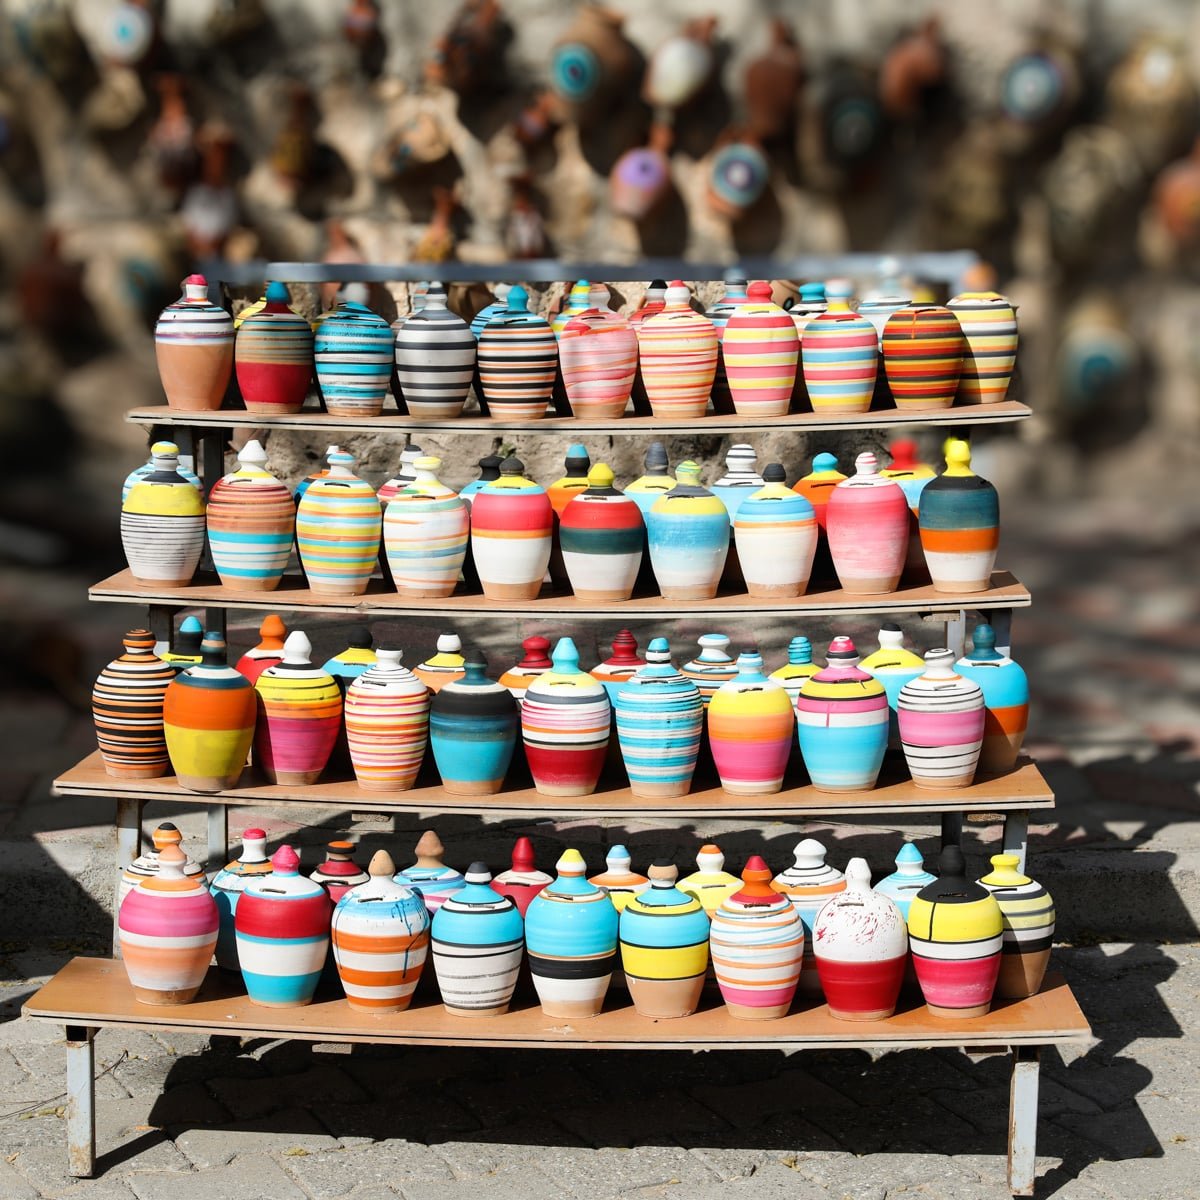 A display of colorful, striped ceramic pots on wooden shelves, arranged in a sunny outdoor market setting, showcasing things to do in Avanos, Cappadocia, Turkey.